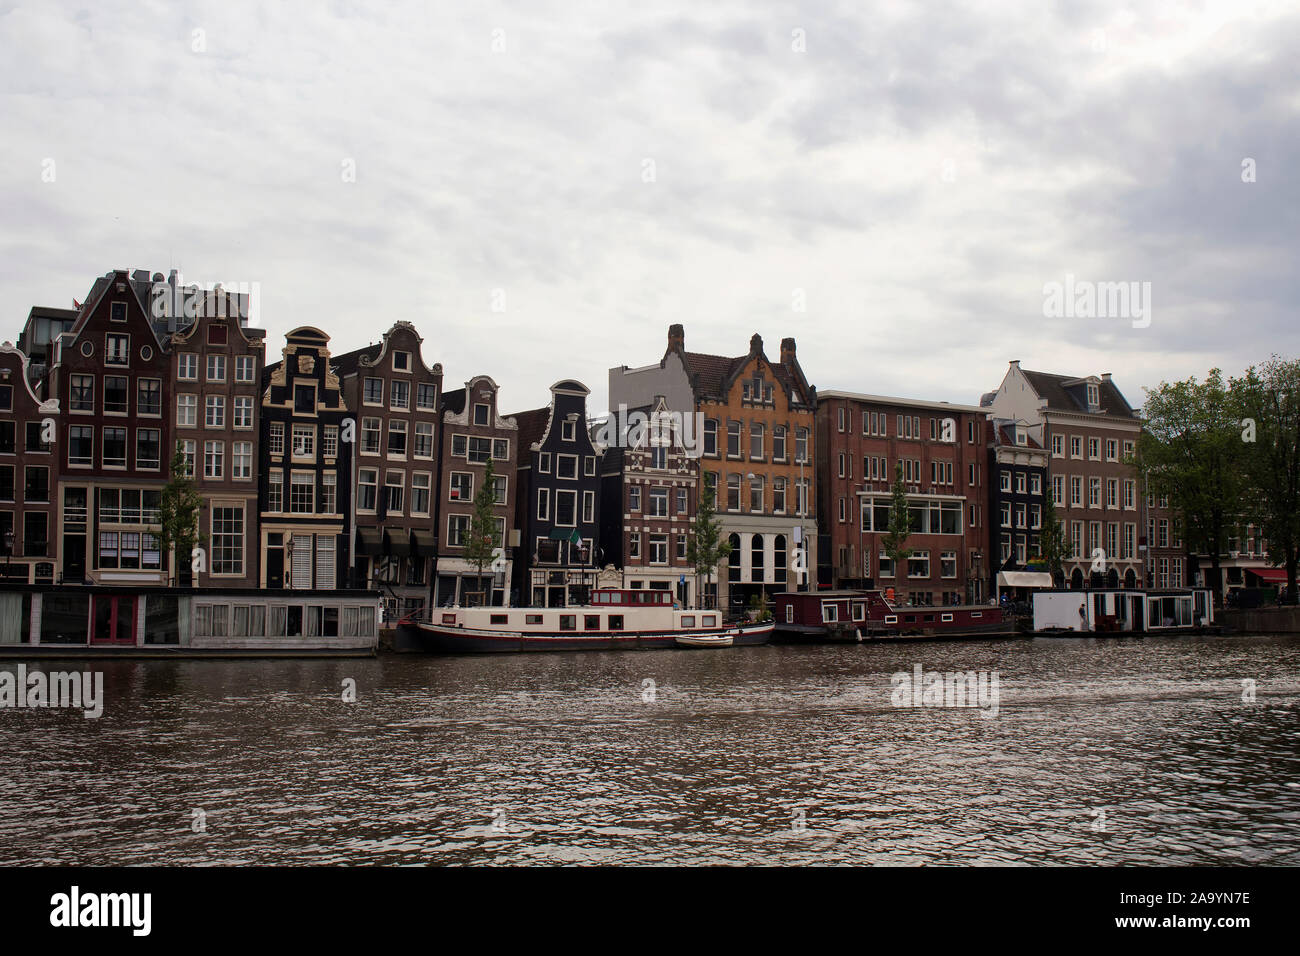 View of Amstel river, canal boat houses and historical, traditional and typical buildings reflecting Dutch architectural style in Amsterdam. It is a s Stock Photo